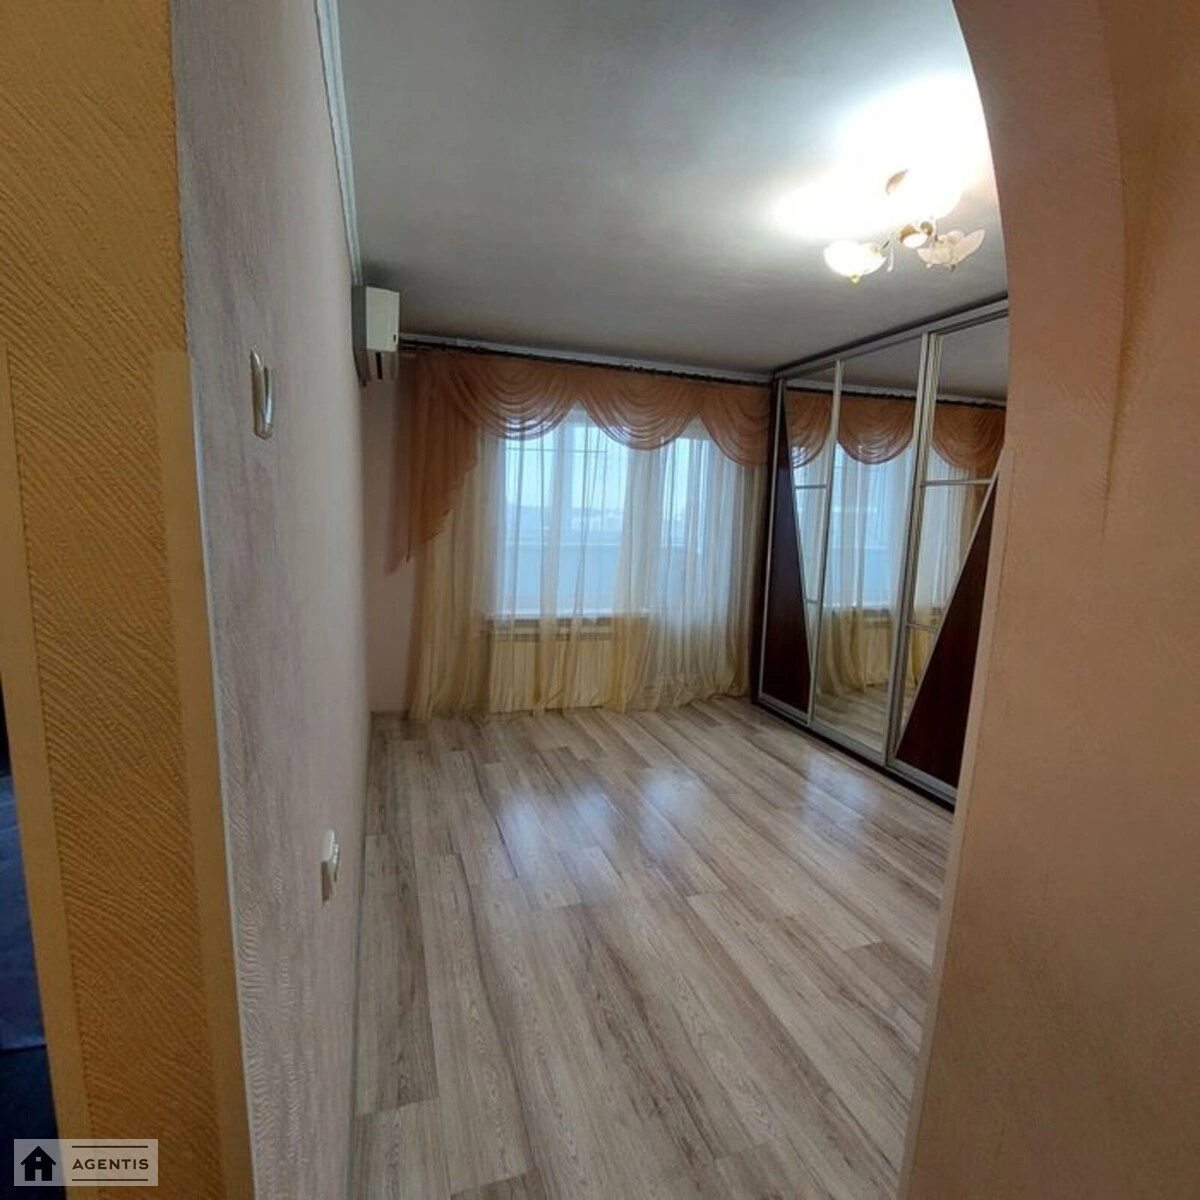 Apartment for rent. 1 room, 37 m², 9th floor/9 floors. Holosiyivskyy rayon, Kyiv. 